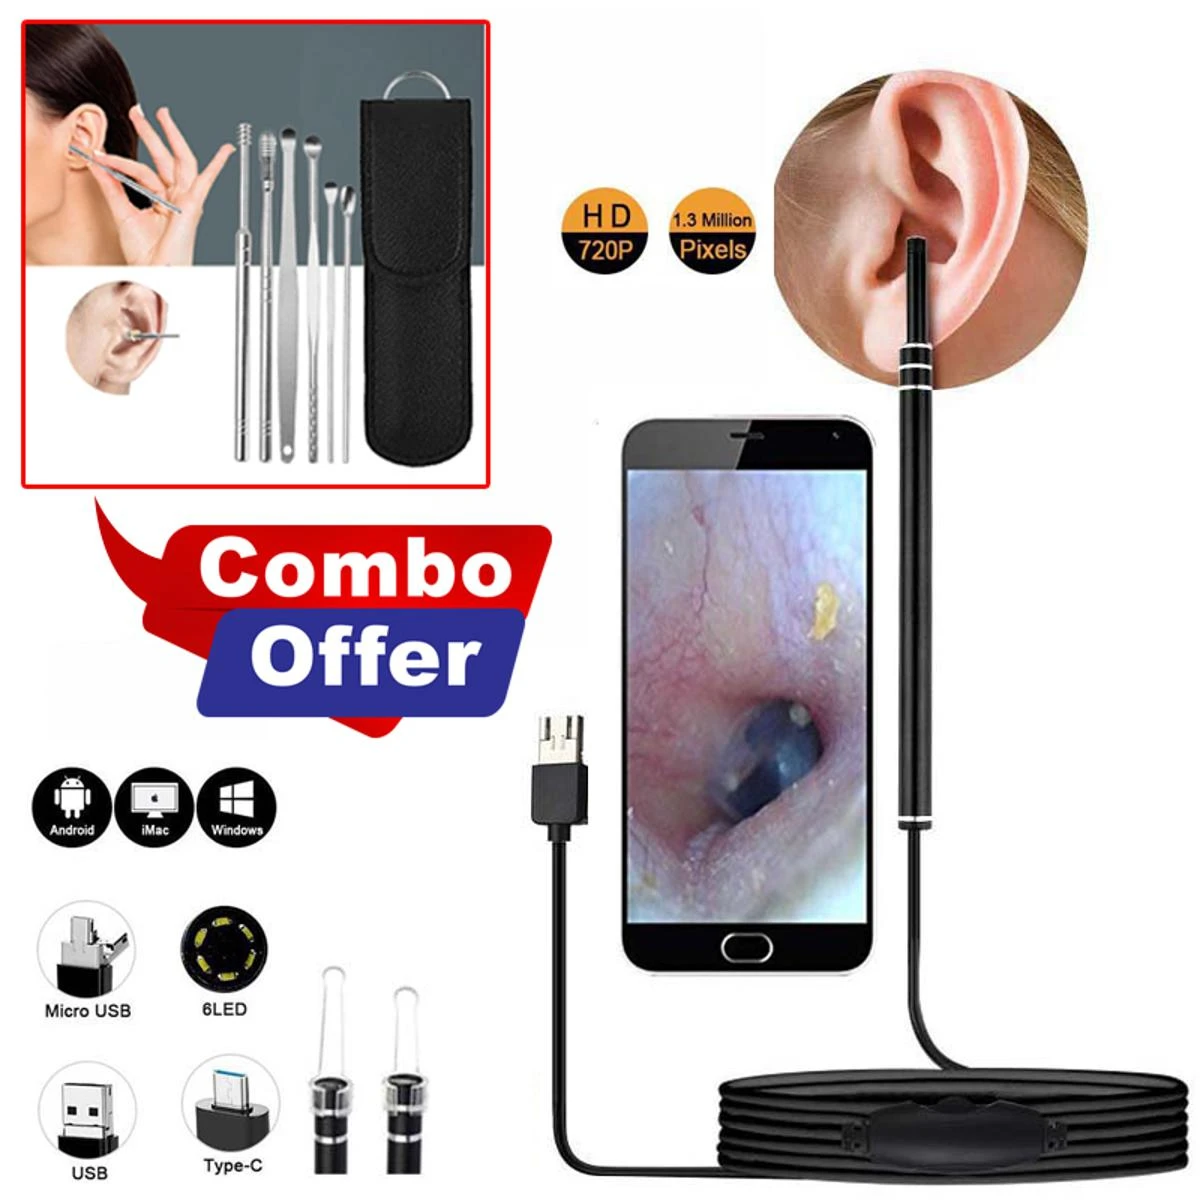 Combo Offer ( Camera Endoscope Ear Cleaning Spoon Tool+Ear Wax Removal Kit)